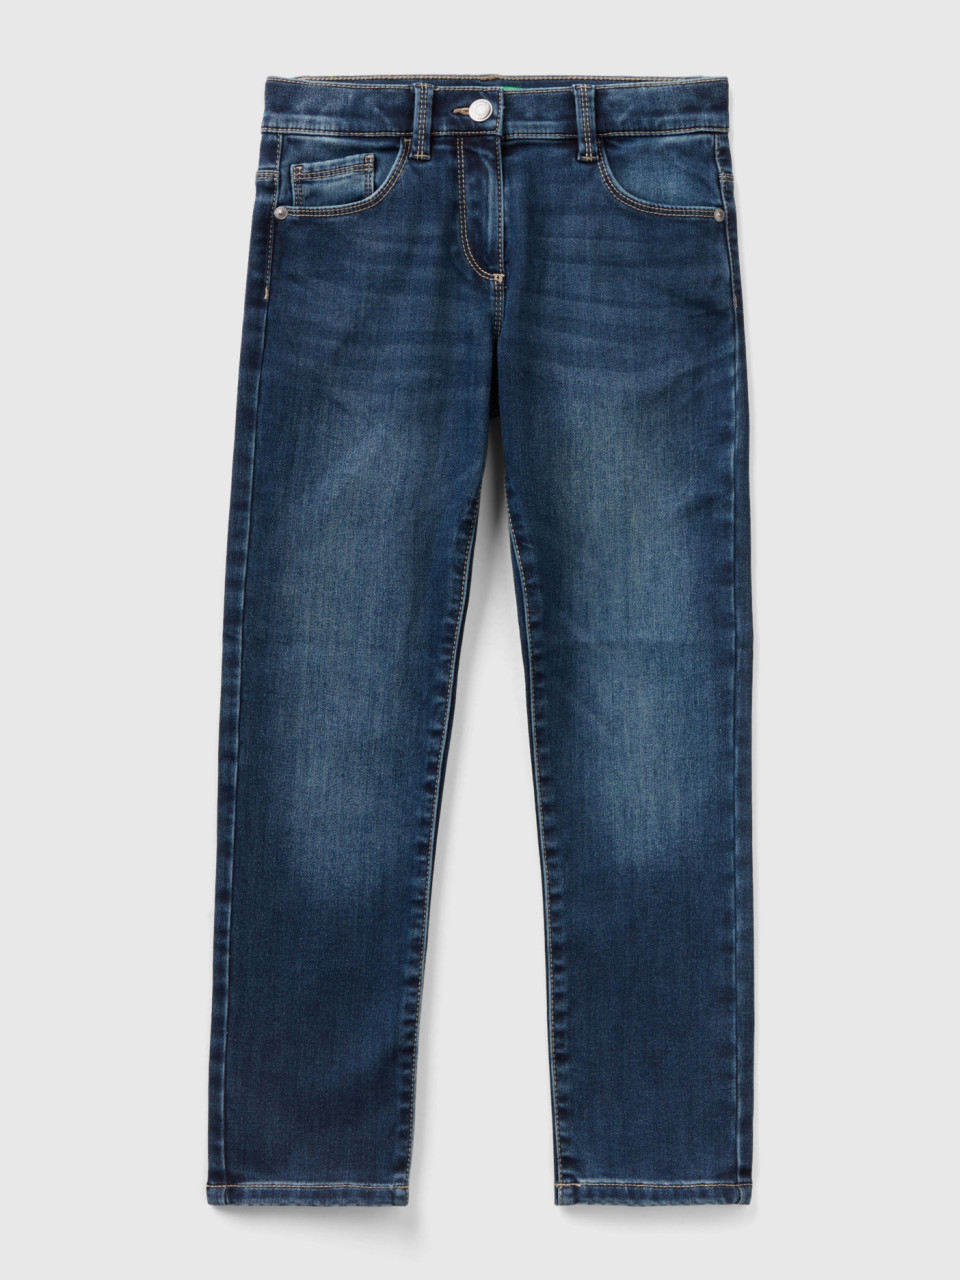 Benetton, Thermal Slim Fit Jeans, Blue, Kids